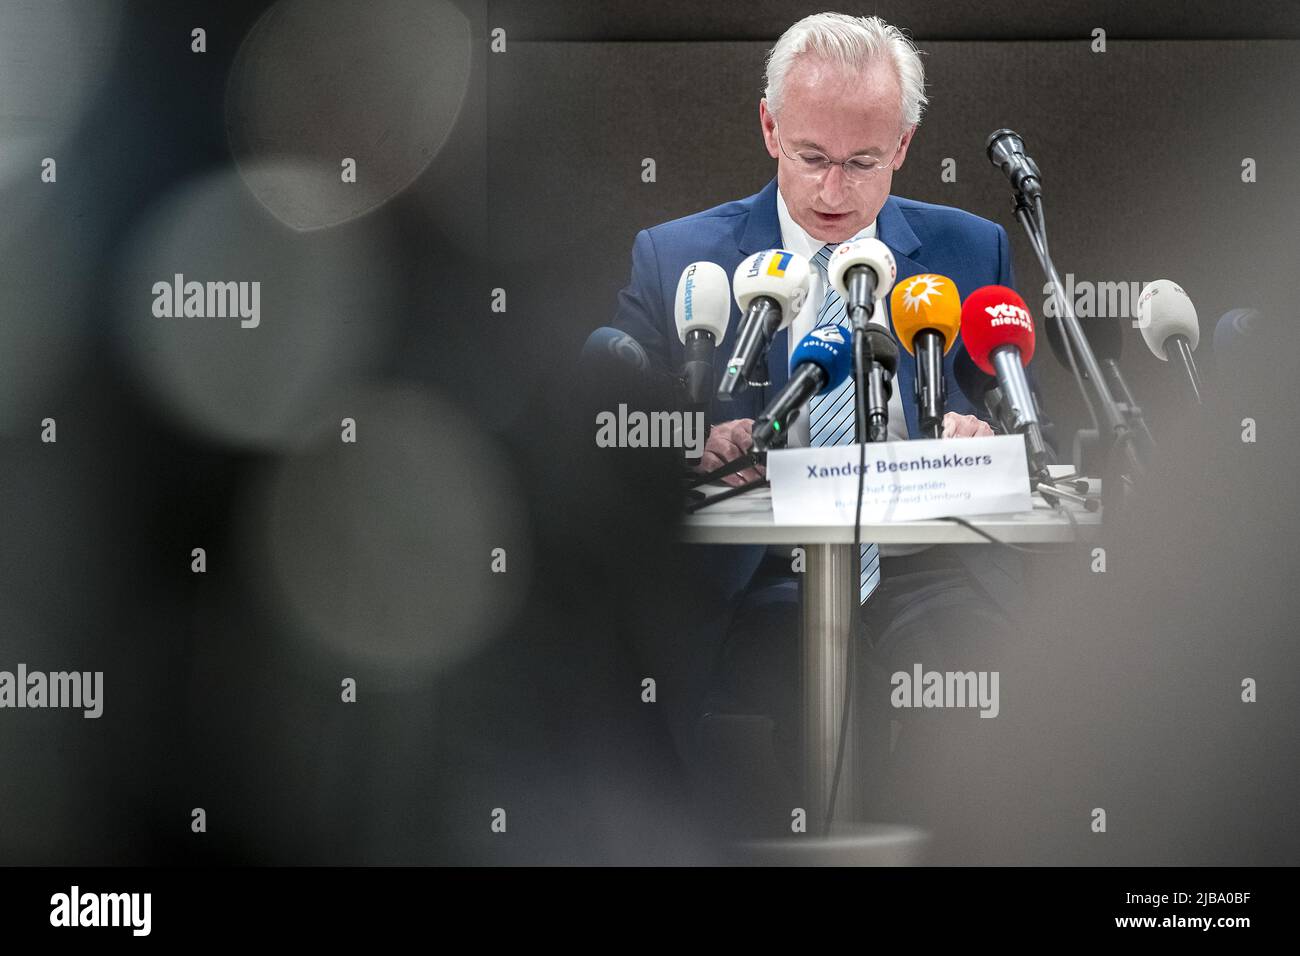 2022-06-04 16:36:52 MAASTRICHT - Mayor of Sittard-Geleen Xander Beenhakkers during a press conference at the police station about the case of the missing boy Gino. ANP ROB ENGELAAR netherlands out - belgium out Stock Photo